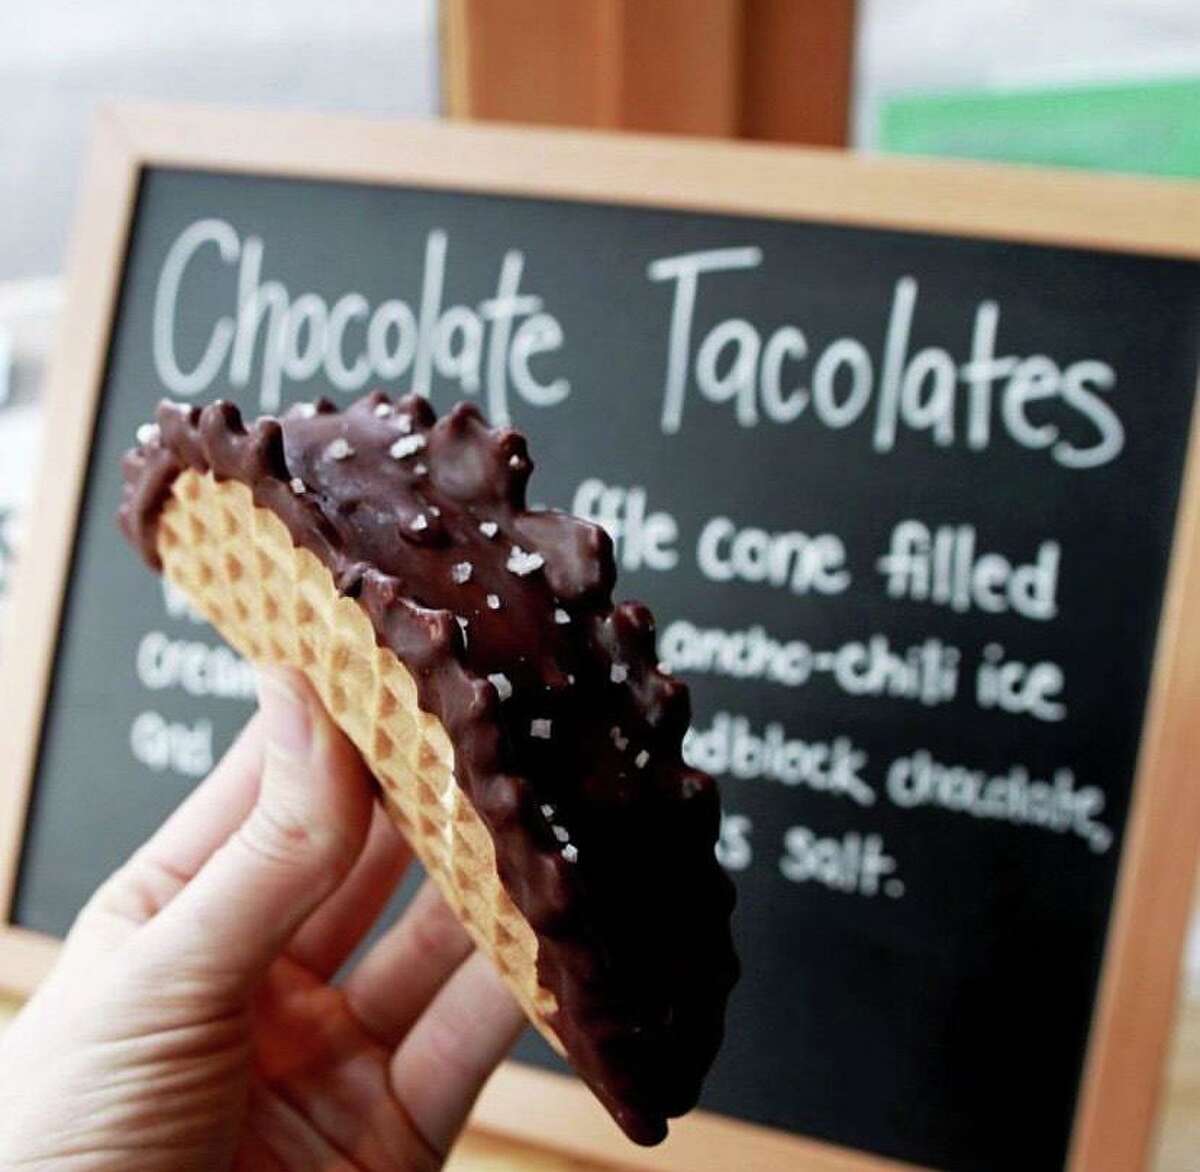 The chocolate tacolate is Salt & Straw’s version of the Choco Taco, which has been discontinued.